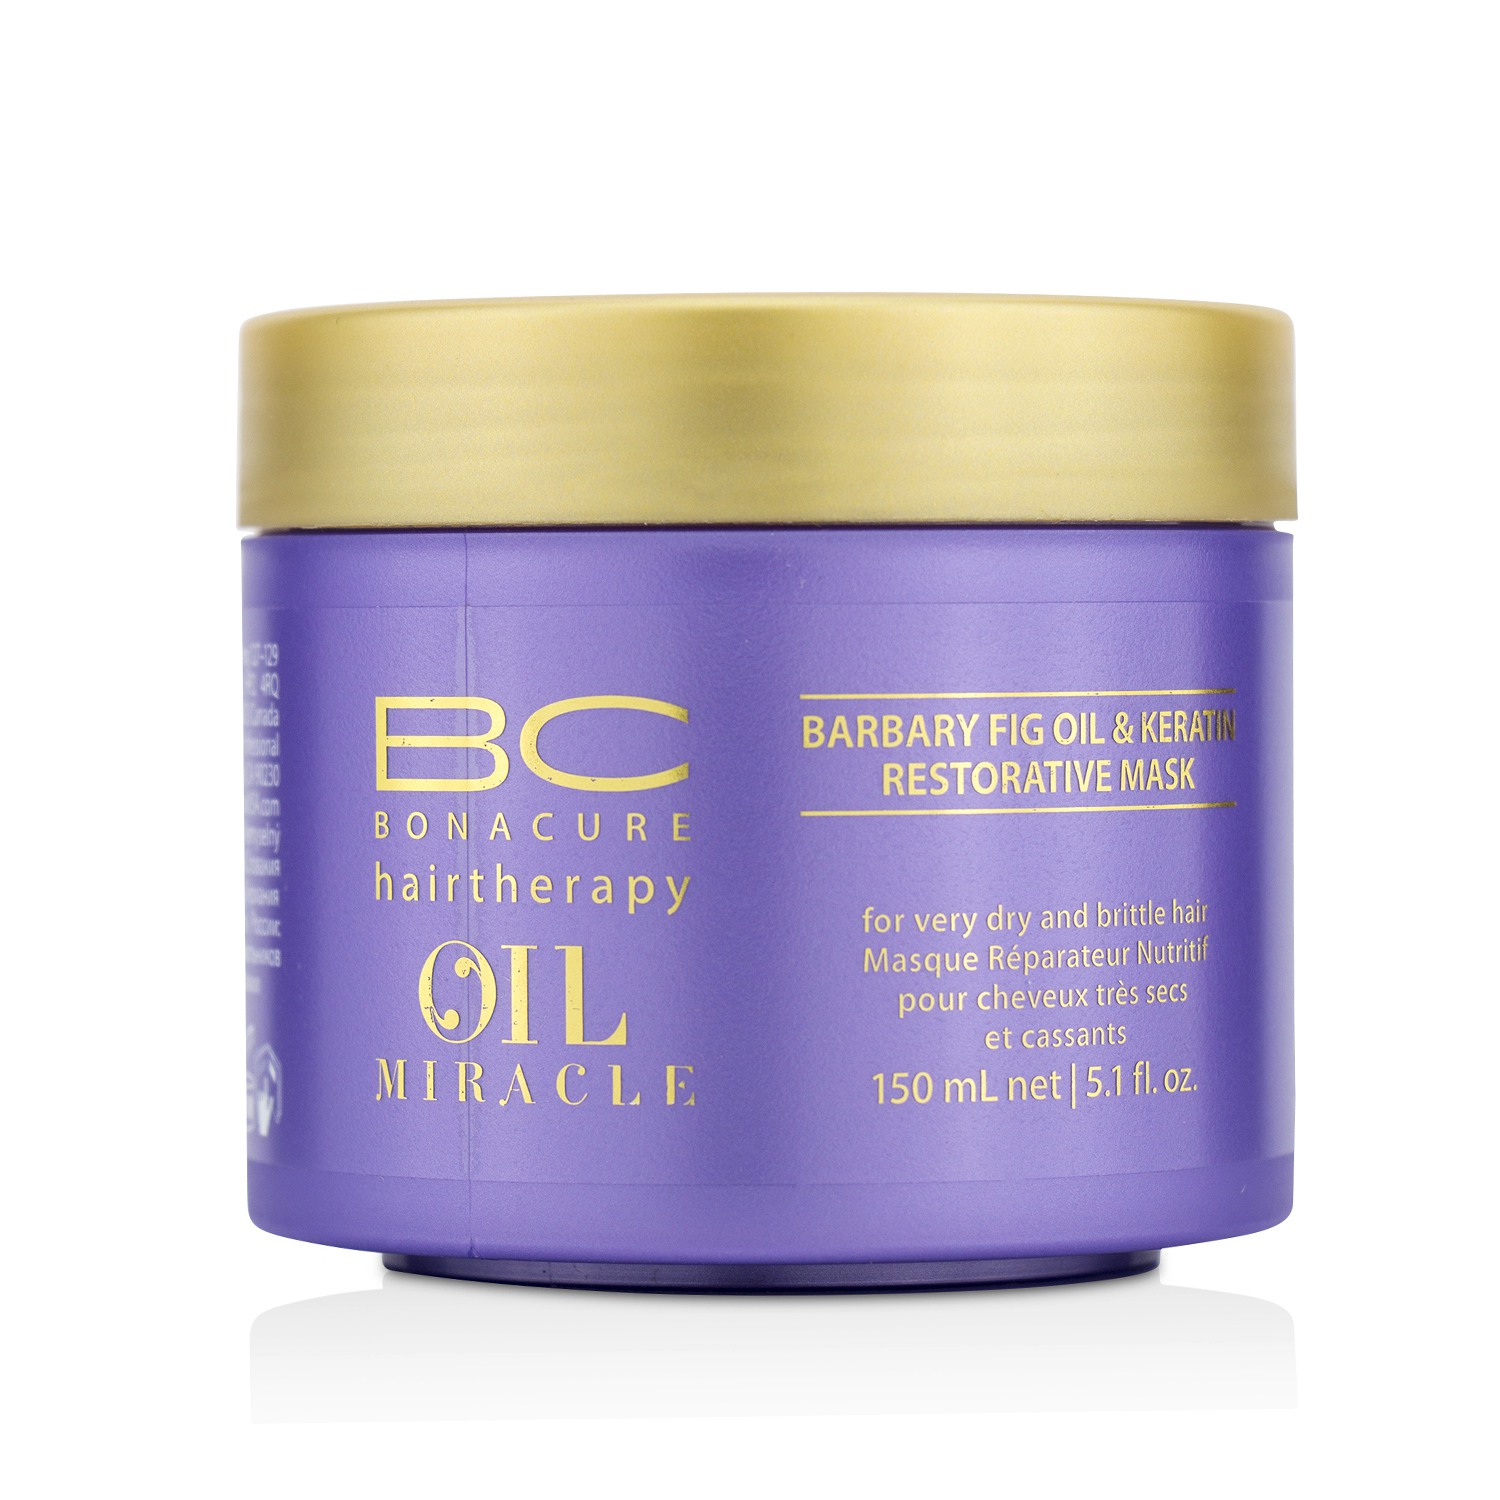 BC Oil Miracle Barbary Fig Oil & Keratin Restorative Mask (For Very Dry and Brittle Hair) Schwarzkopf Image